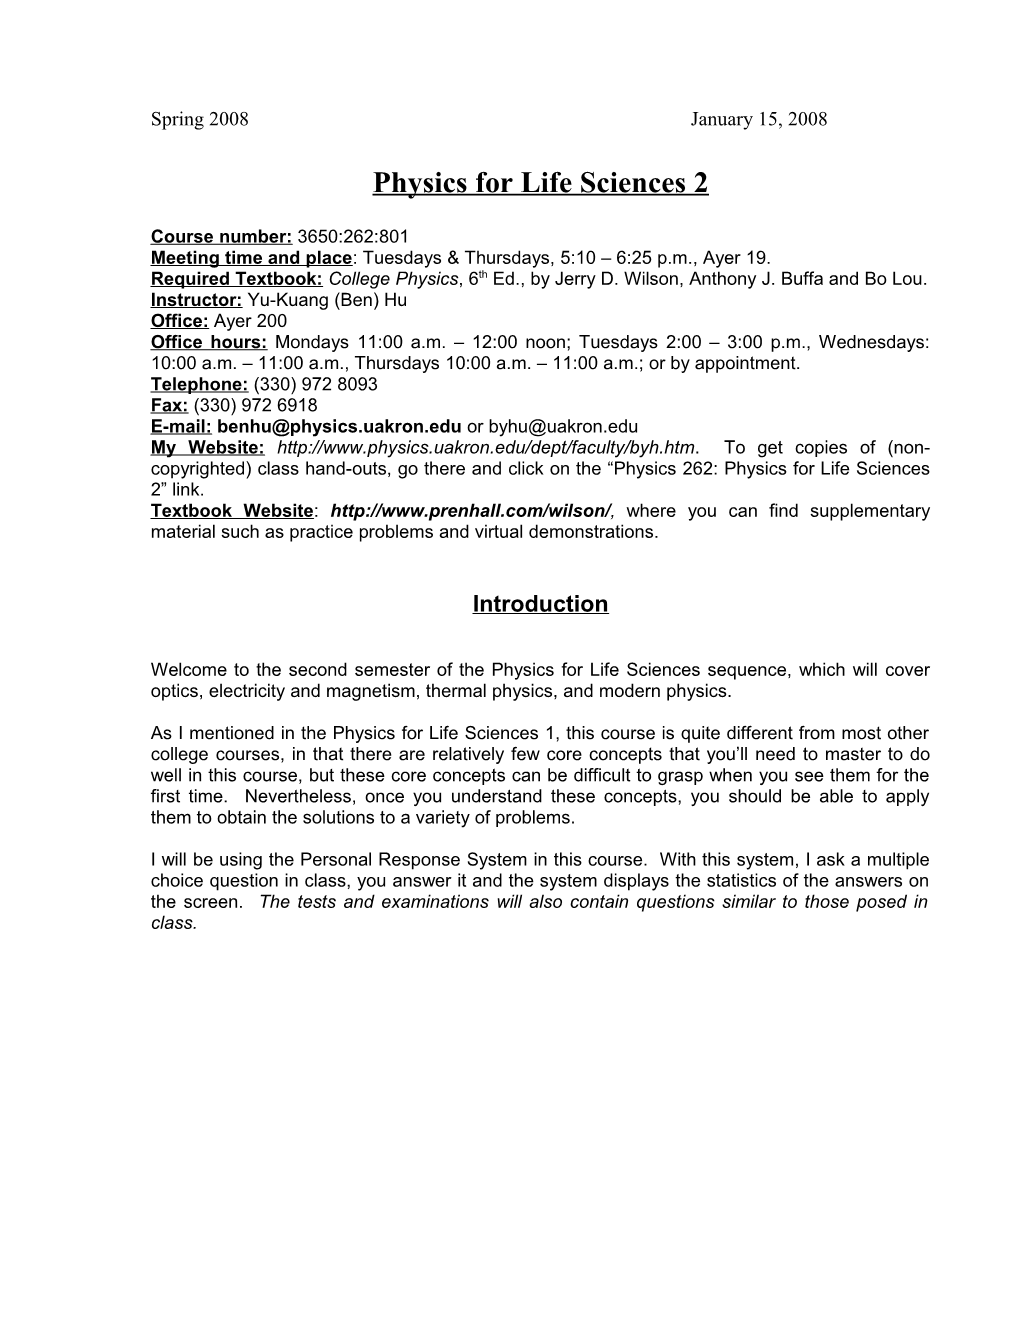 Physics for Life Sciences 2